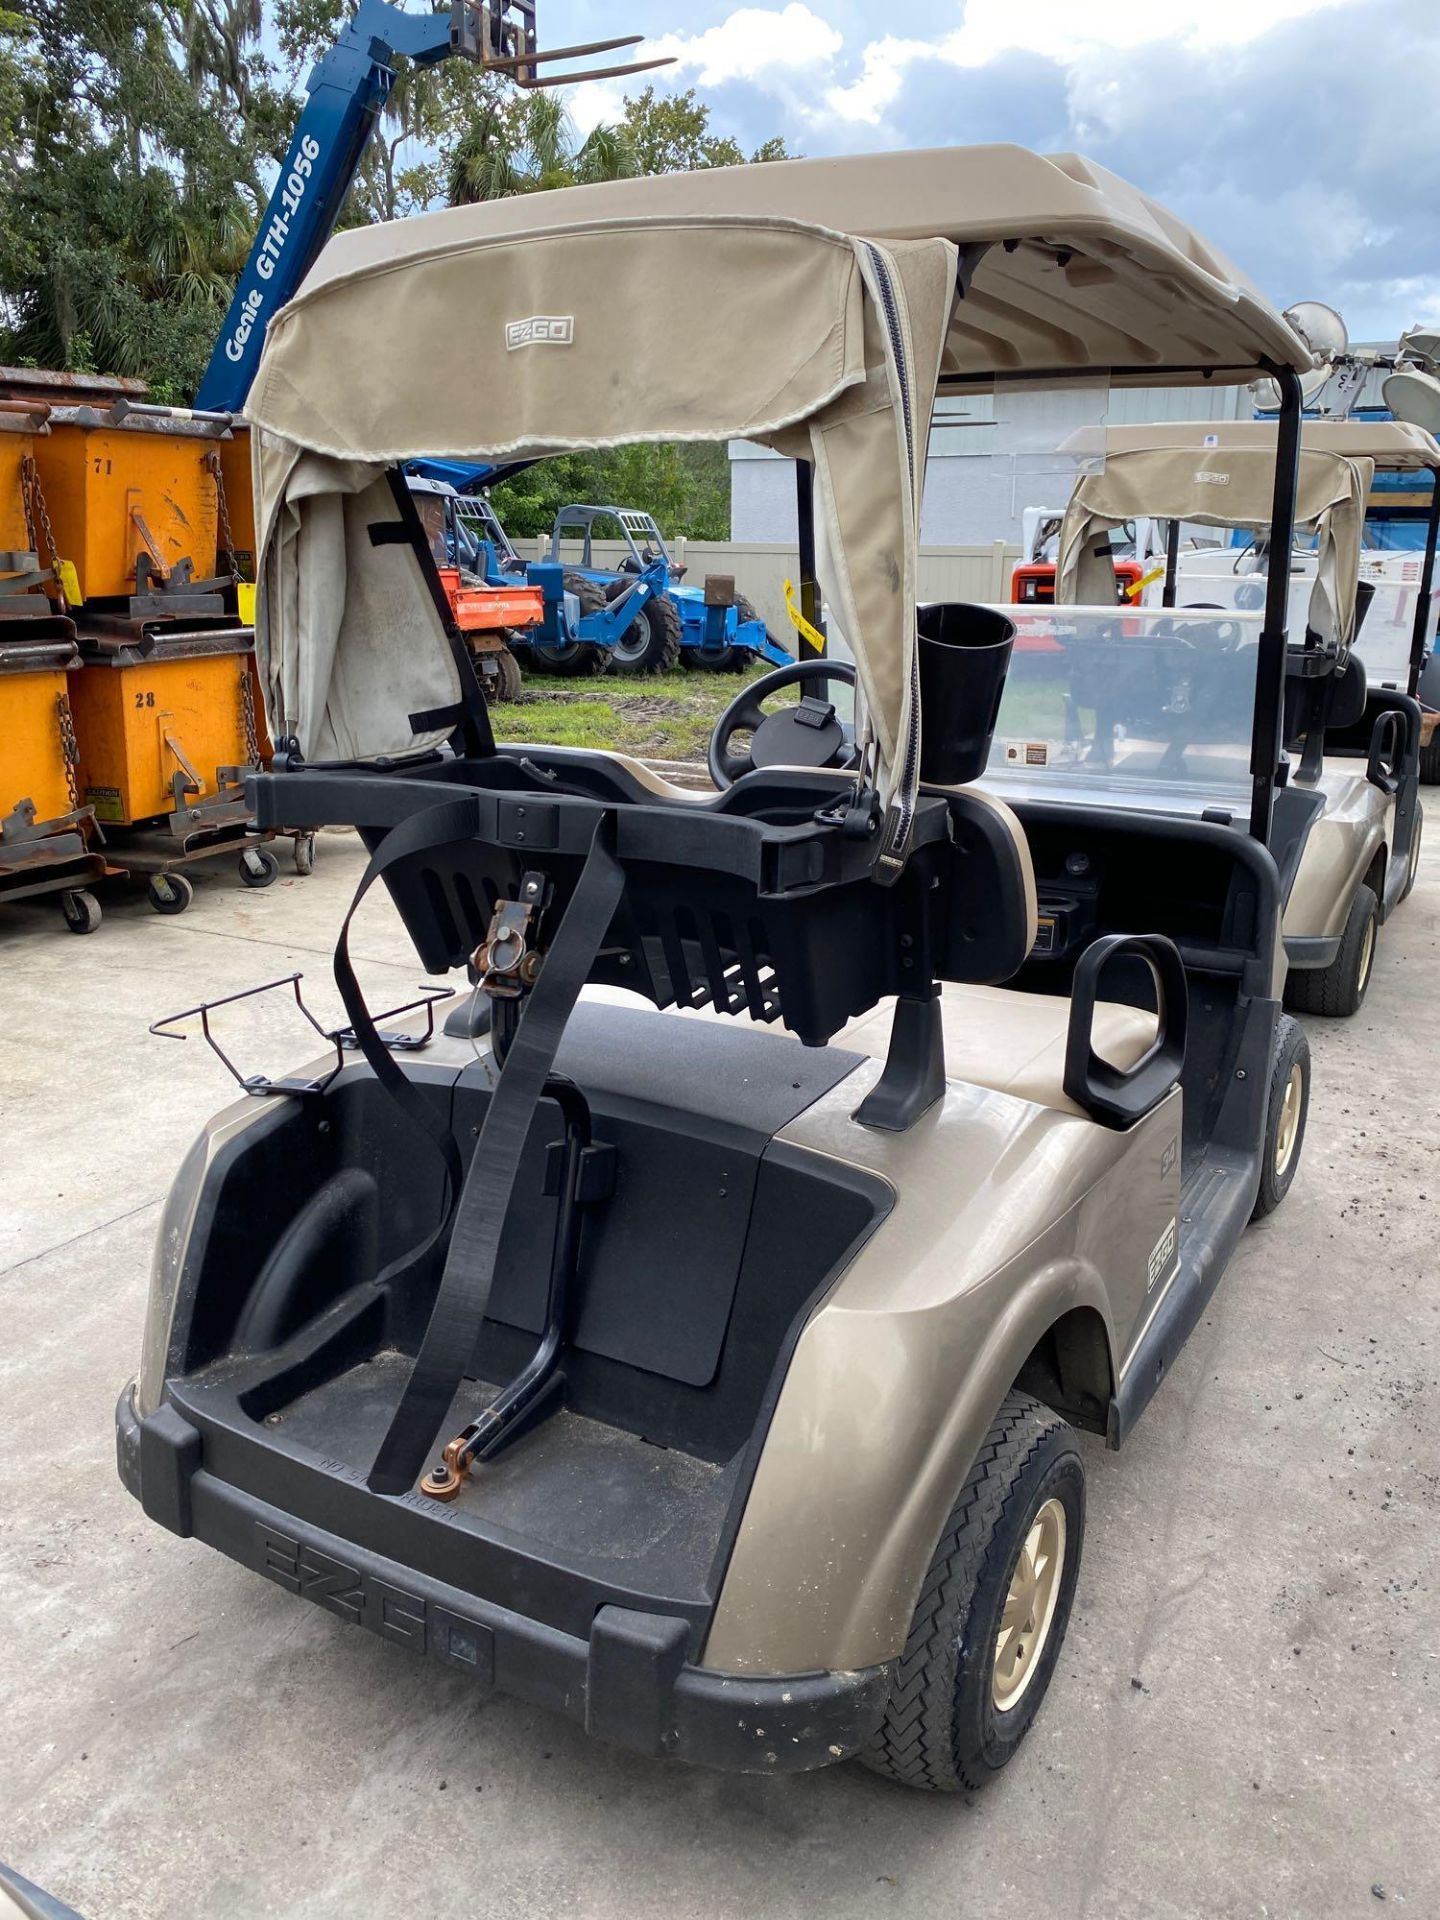 2016 EZ-GO RXV ELECTRIC GOLF CART WITH TROJAN HYDROLINK WATERING SYSTEM BATTERIES, EX-GO DELTA-Q SC- - Image 3 of 7